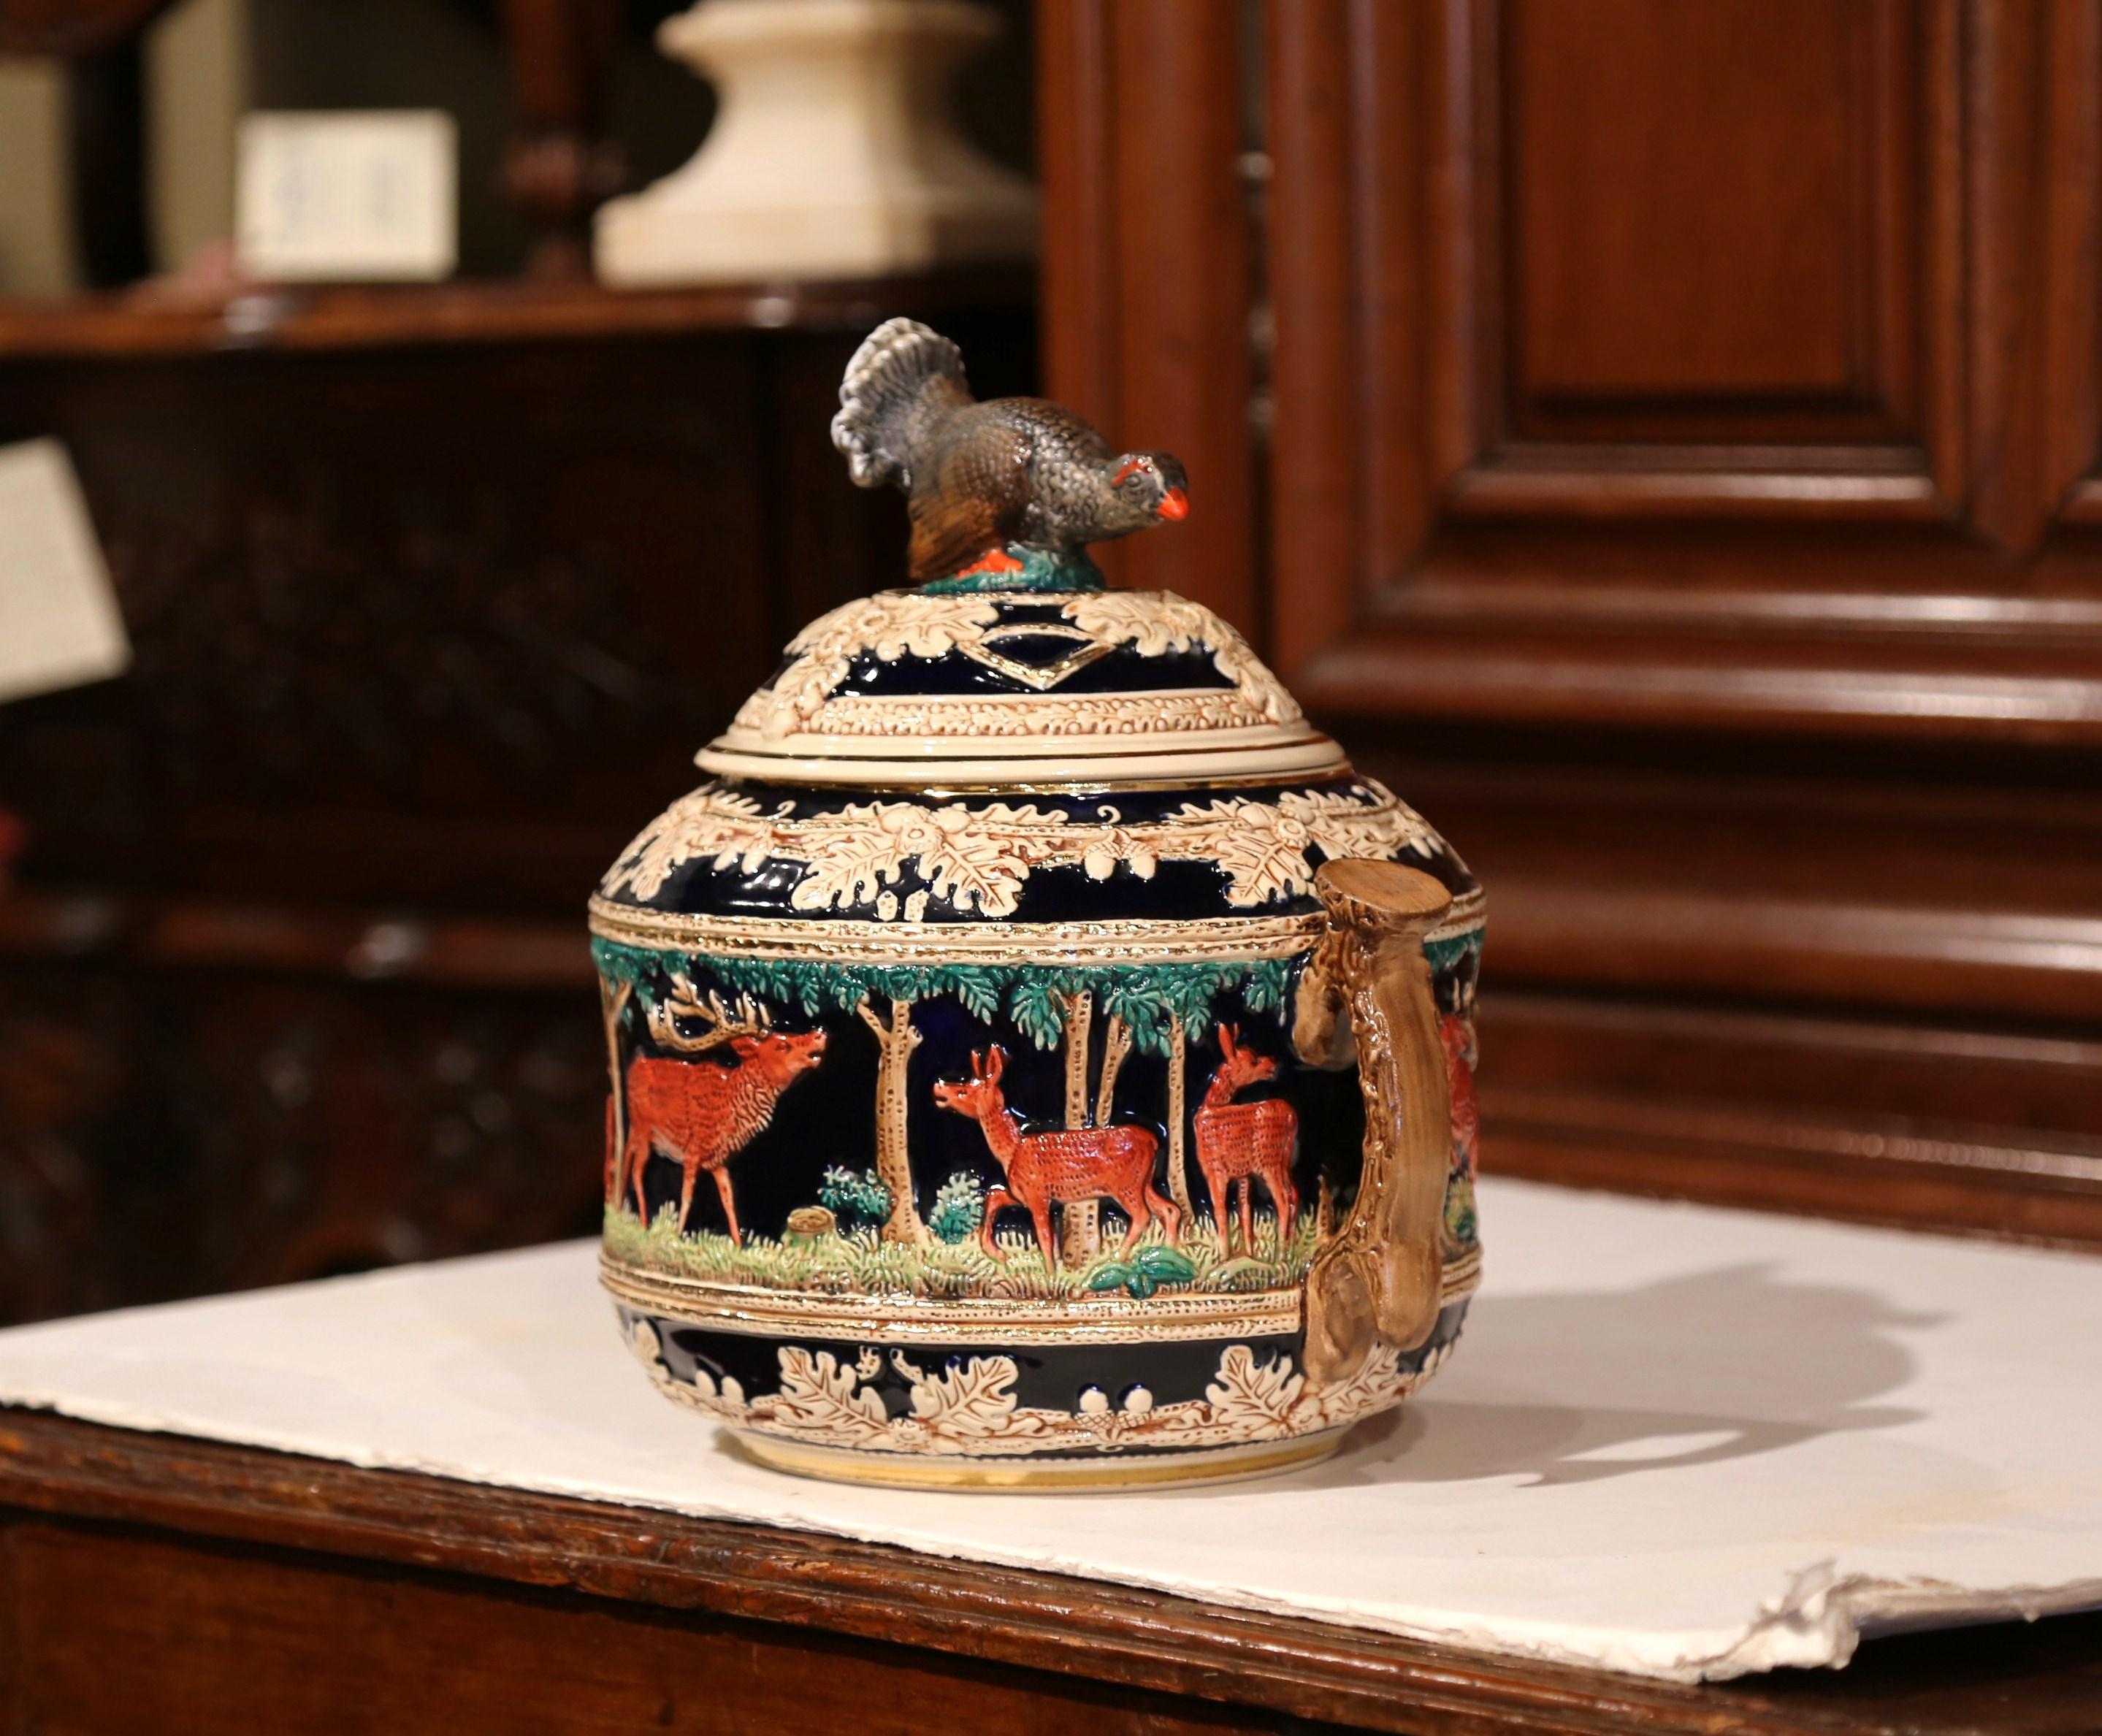 Embellish your dining room table with this elegant and colorful centre piece. Crafted in northern France, circa 1920, the dish with antler shaped handles, has hunting decor including deer figures all around carved turkey sculpture on the top lid.